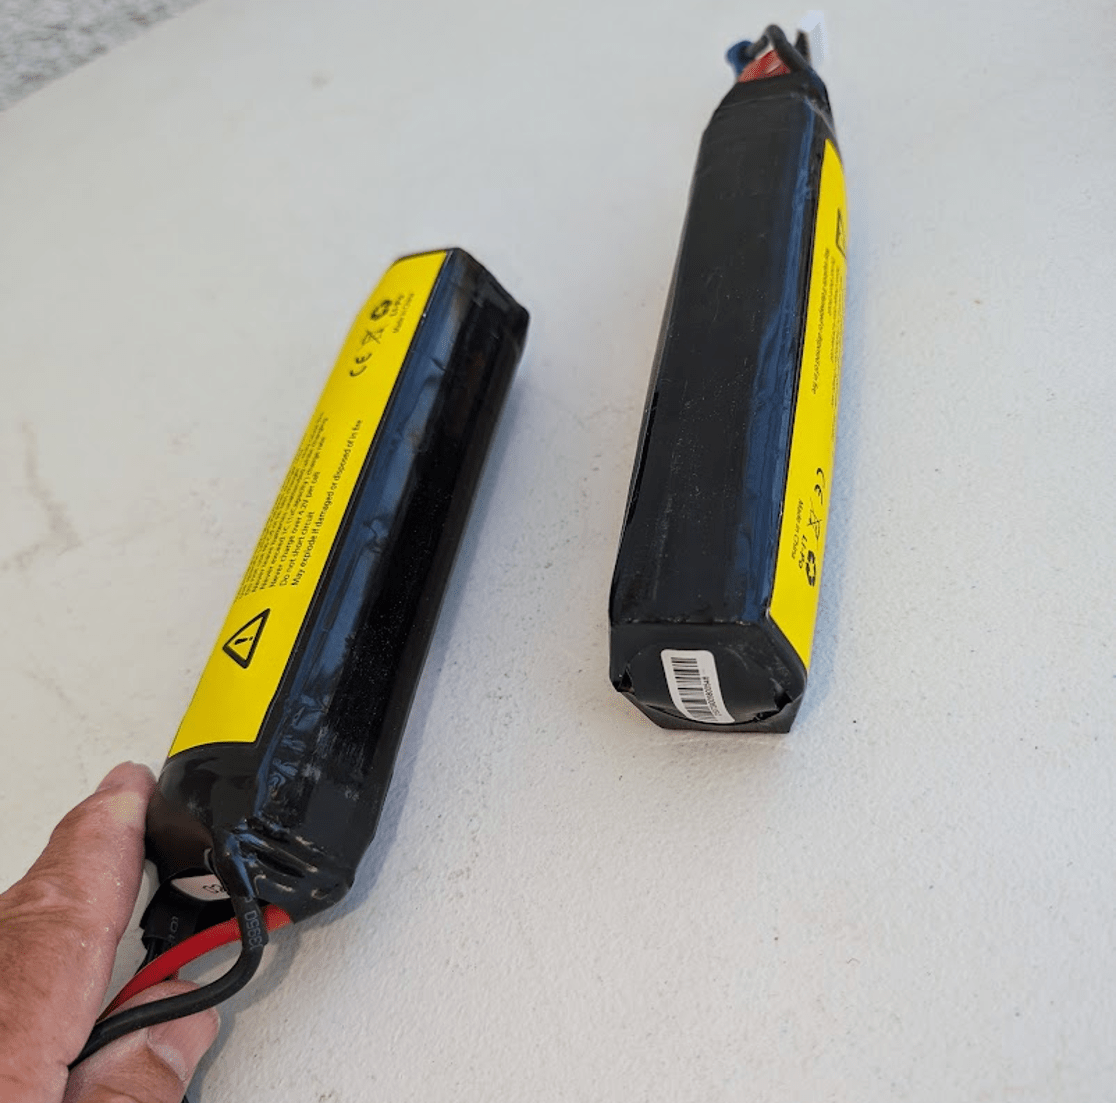 LiPo Battery Safety Tips